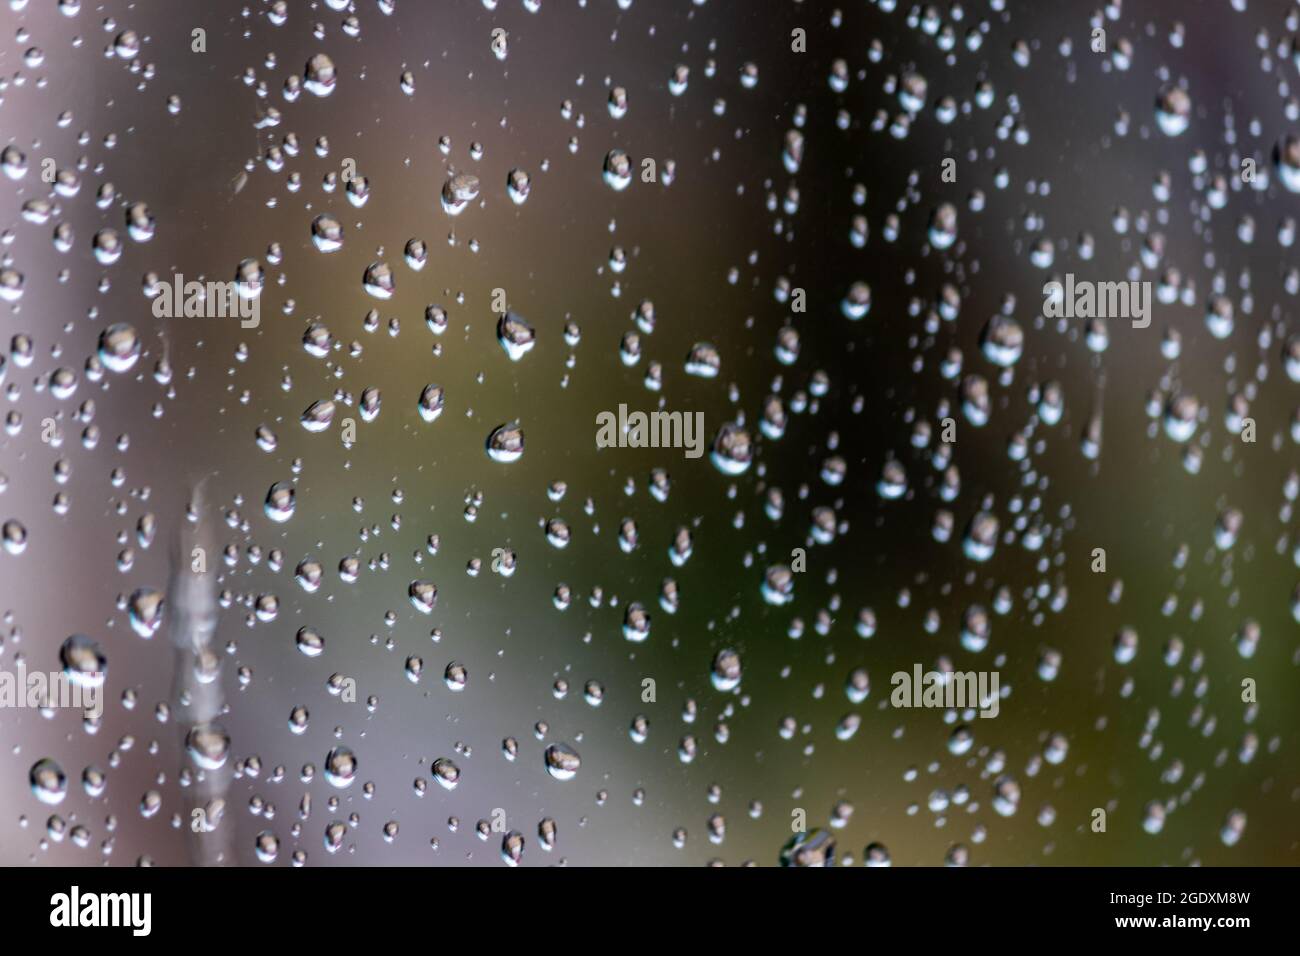 Rain drops must be caught on camera before they slip away Stock Photo